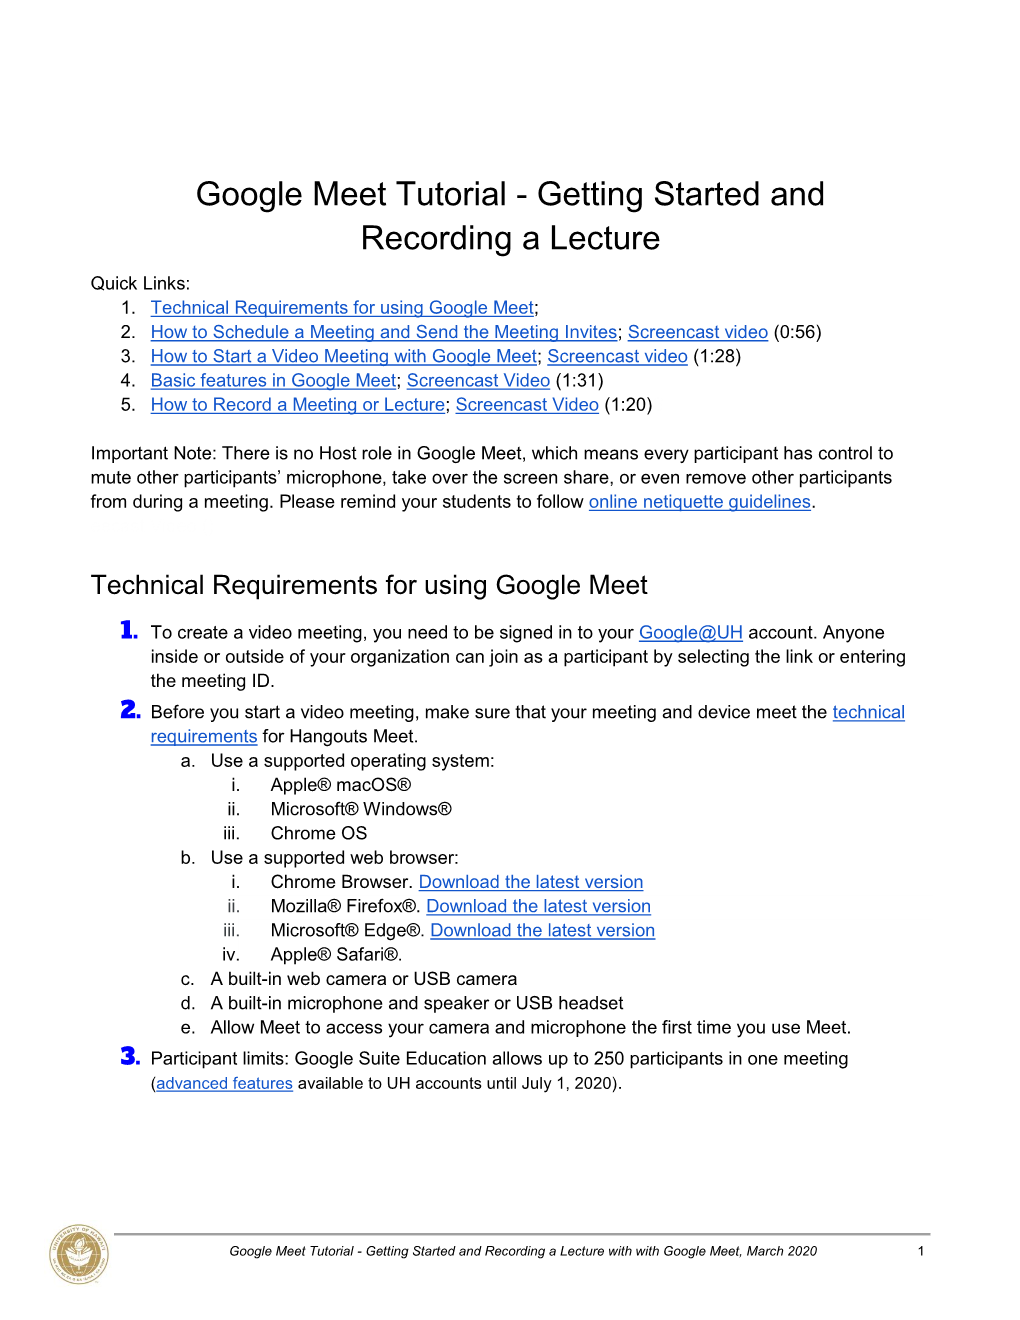 Google Meet Tutorial - Getting Started and Recording a Lecture